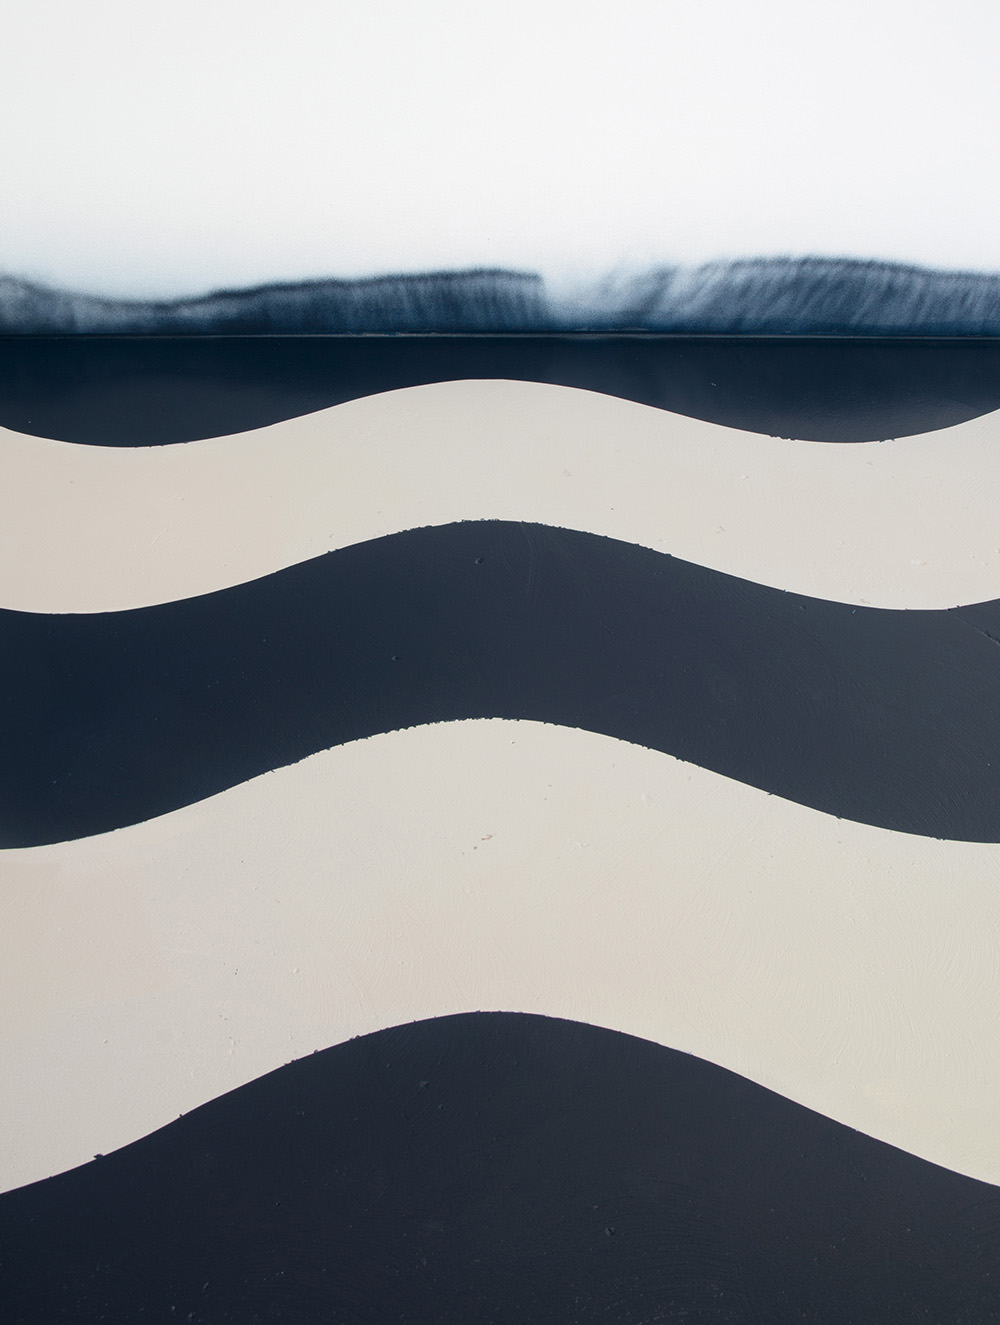 A dark blue and cream set of wavy stripes with the top stripe looking like a misty wave crashing over.